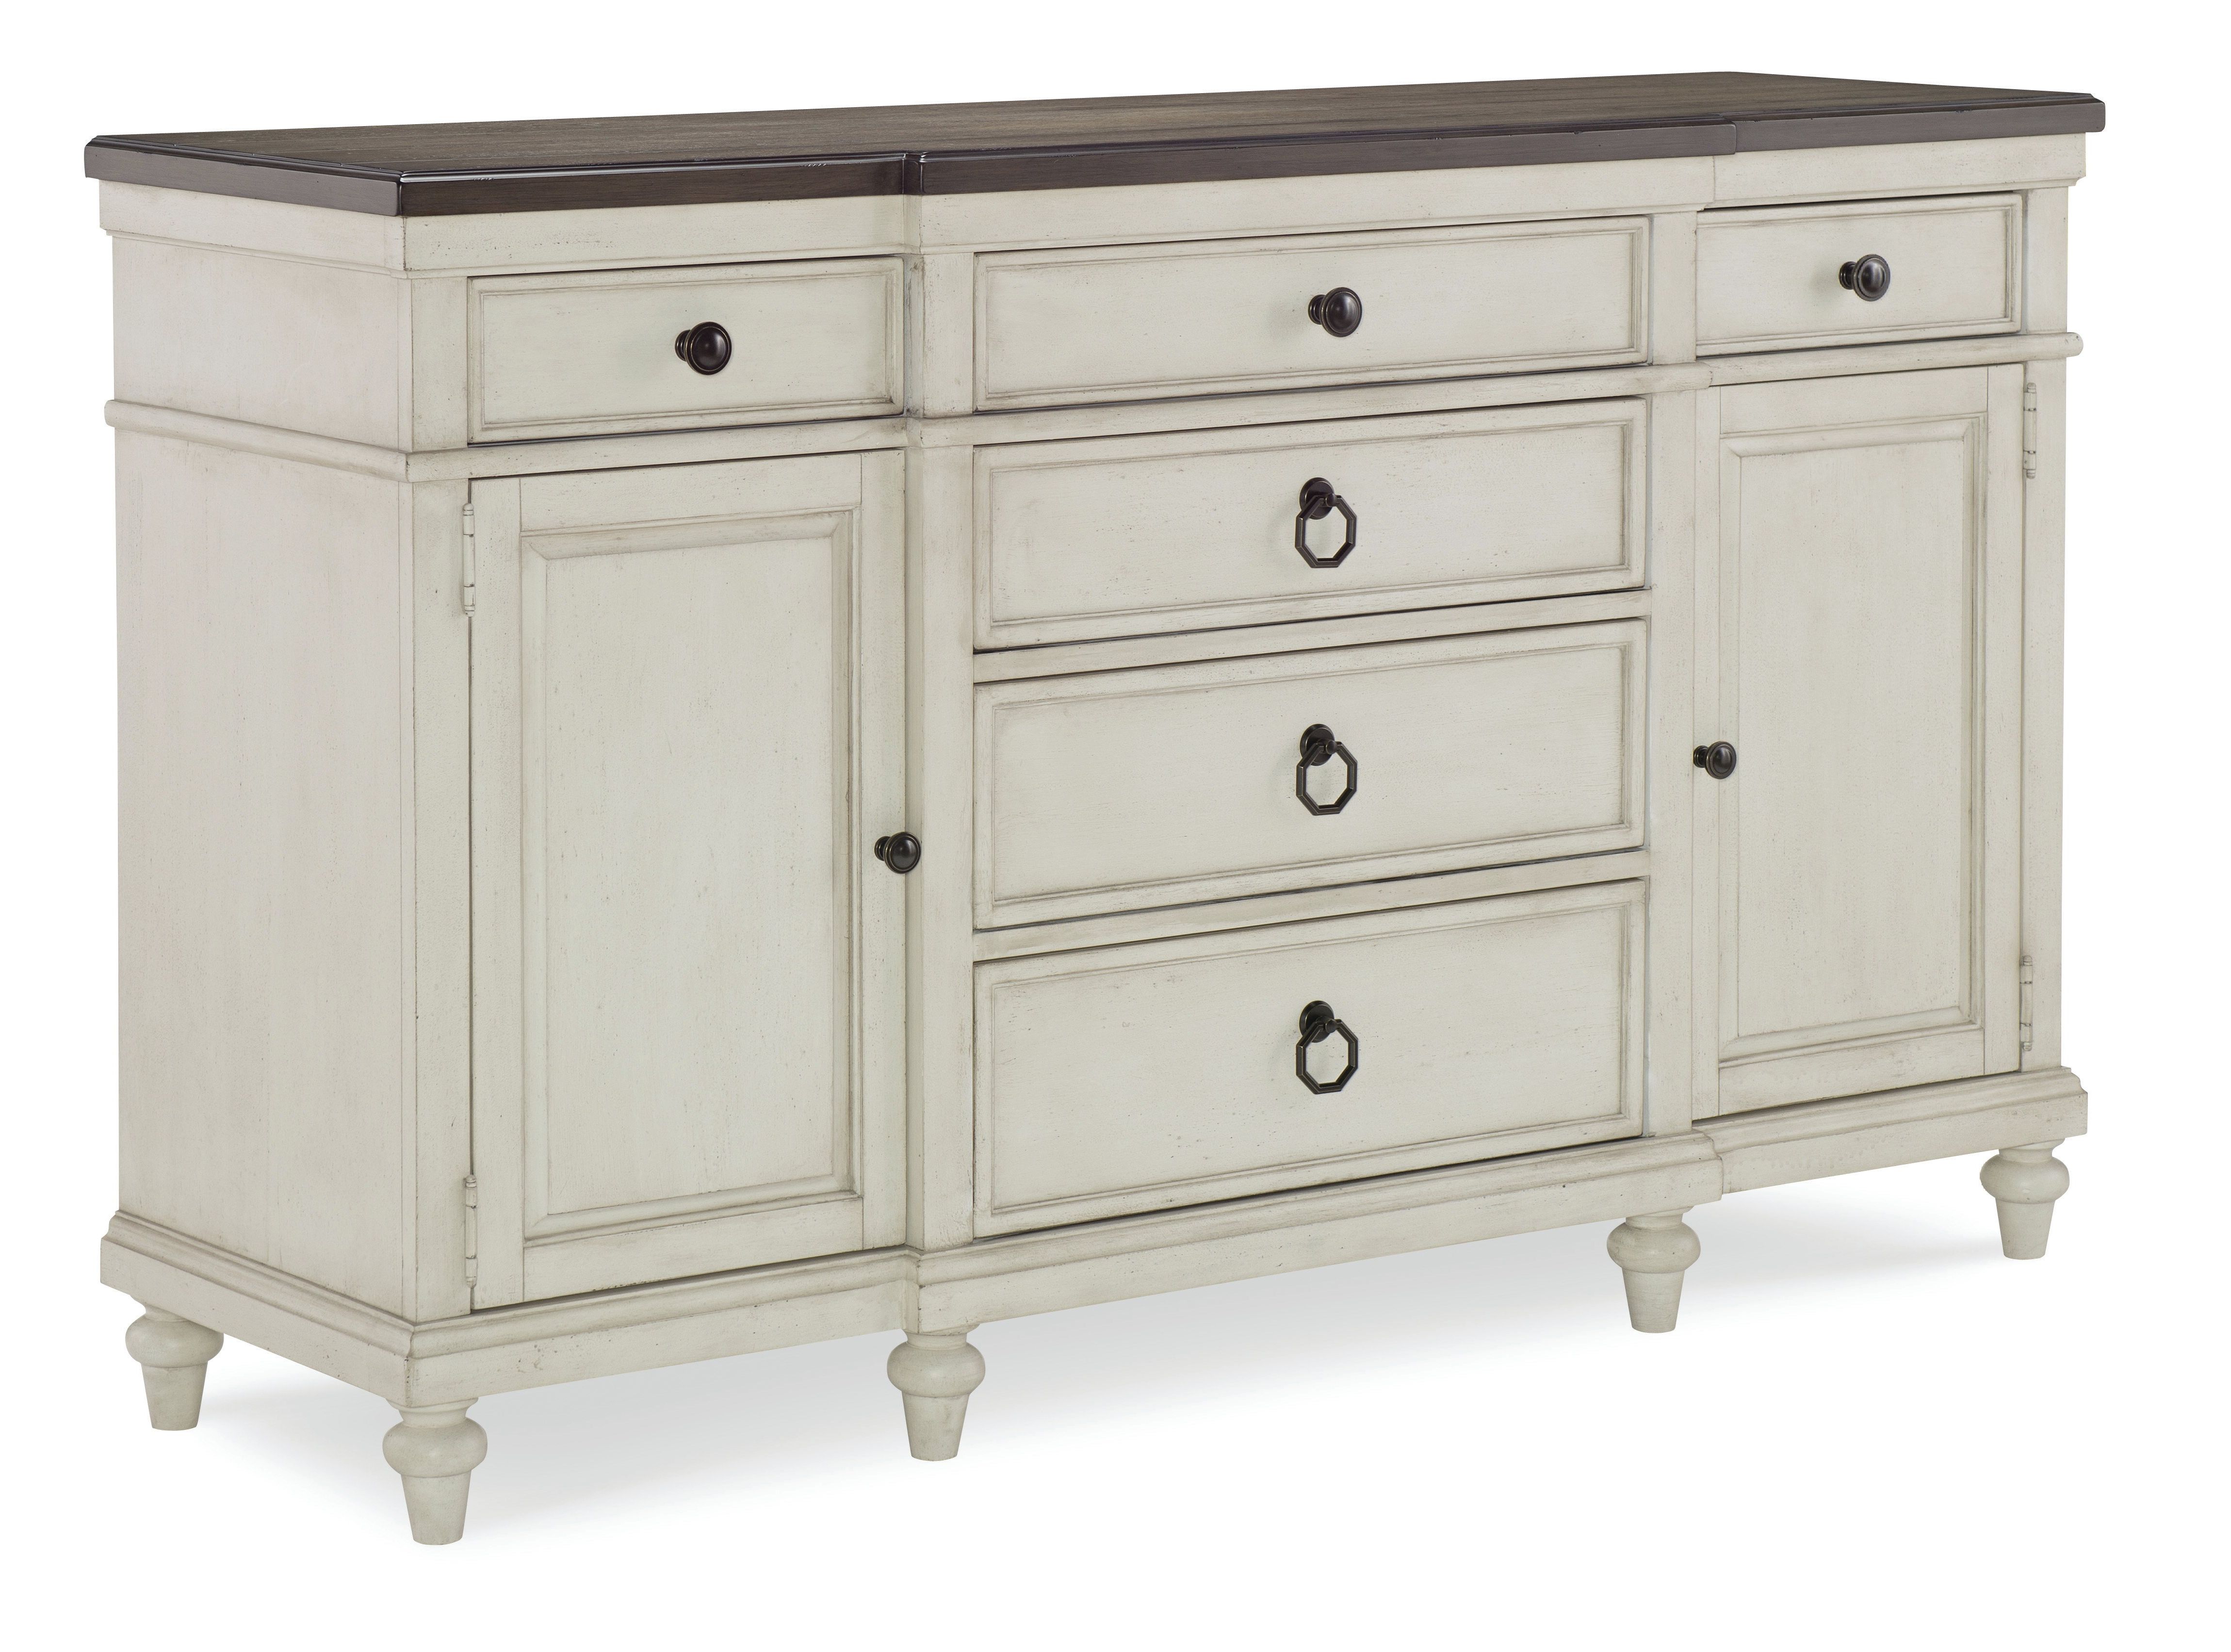 Silverware Storage Equipped Sideboards & Buffets | Joss & Main With Payton Serving Sideboards (View 6 of 20)